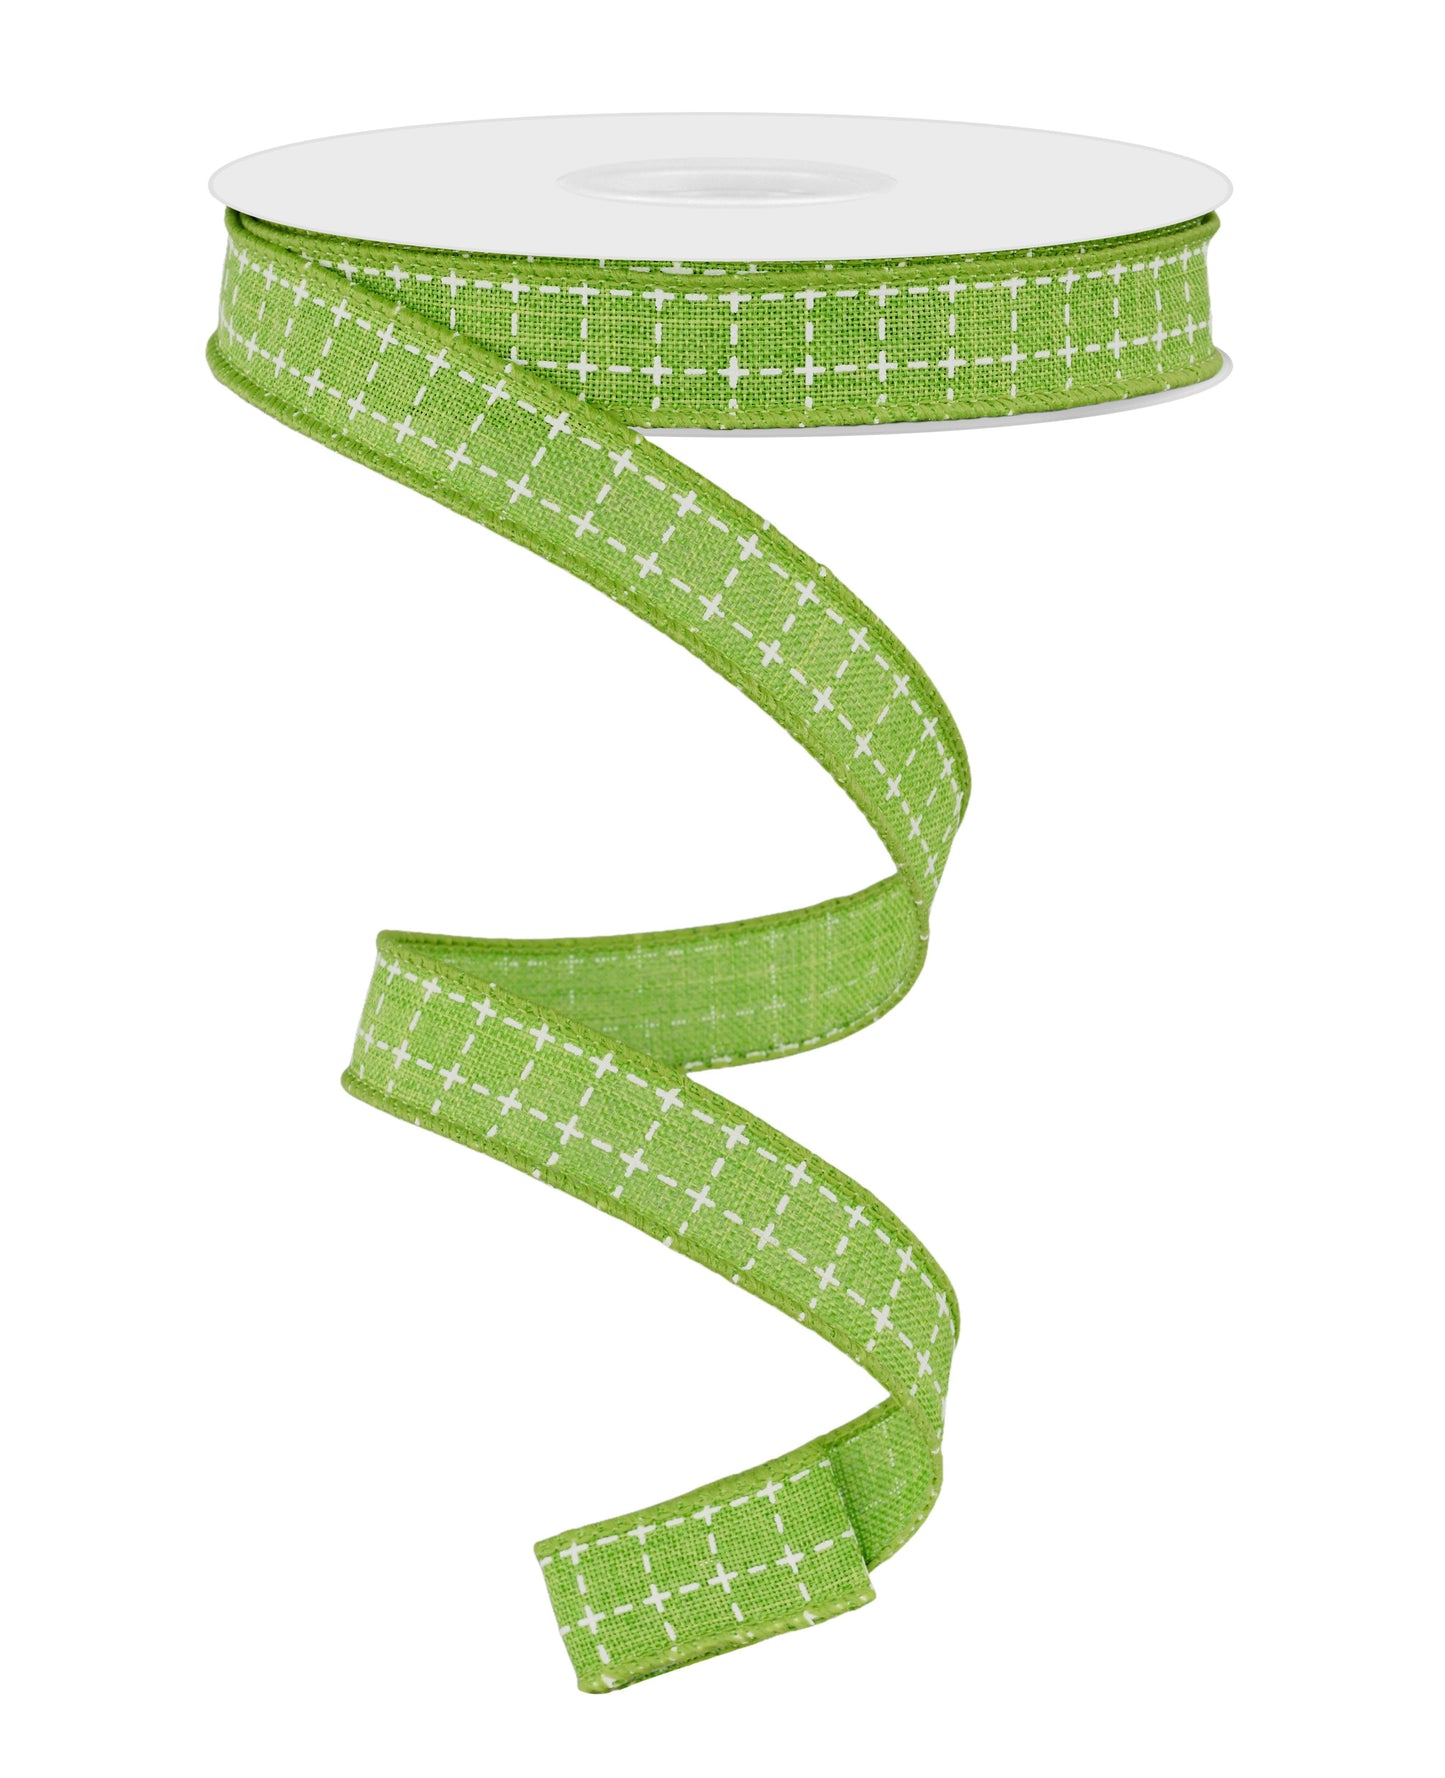 Wired Ribbon * Raised Stitch * Lime Green and White Canvas * 5/8" x 10 Yards * RGF1090E9